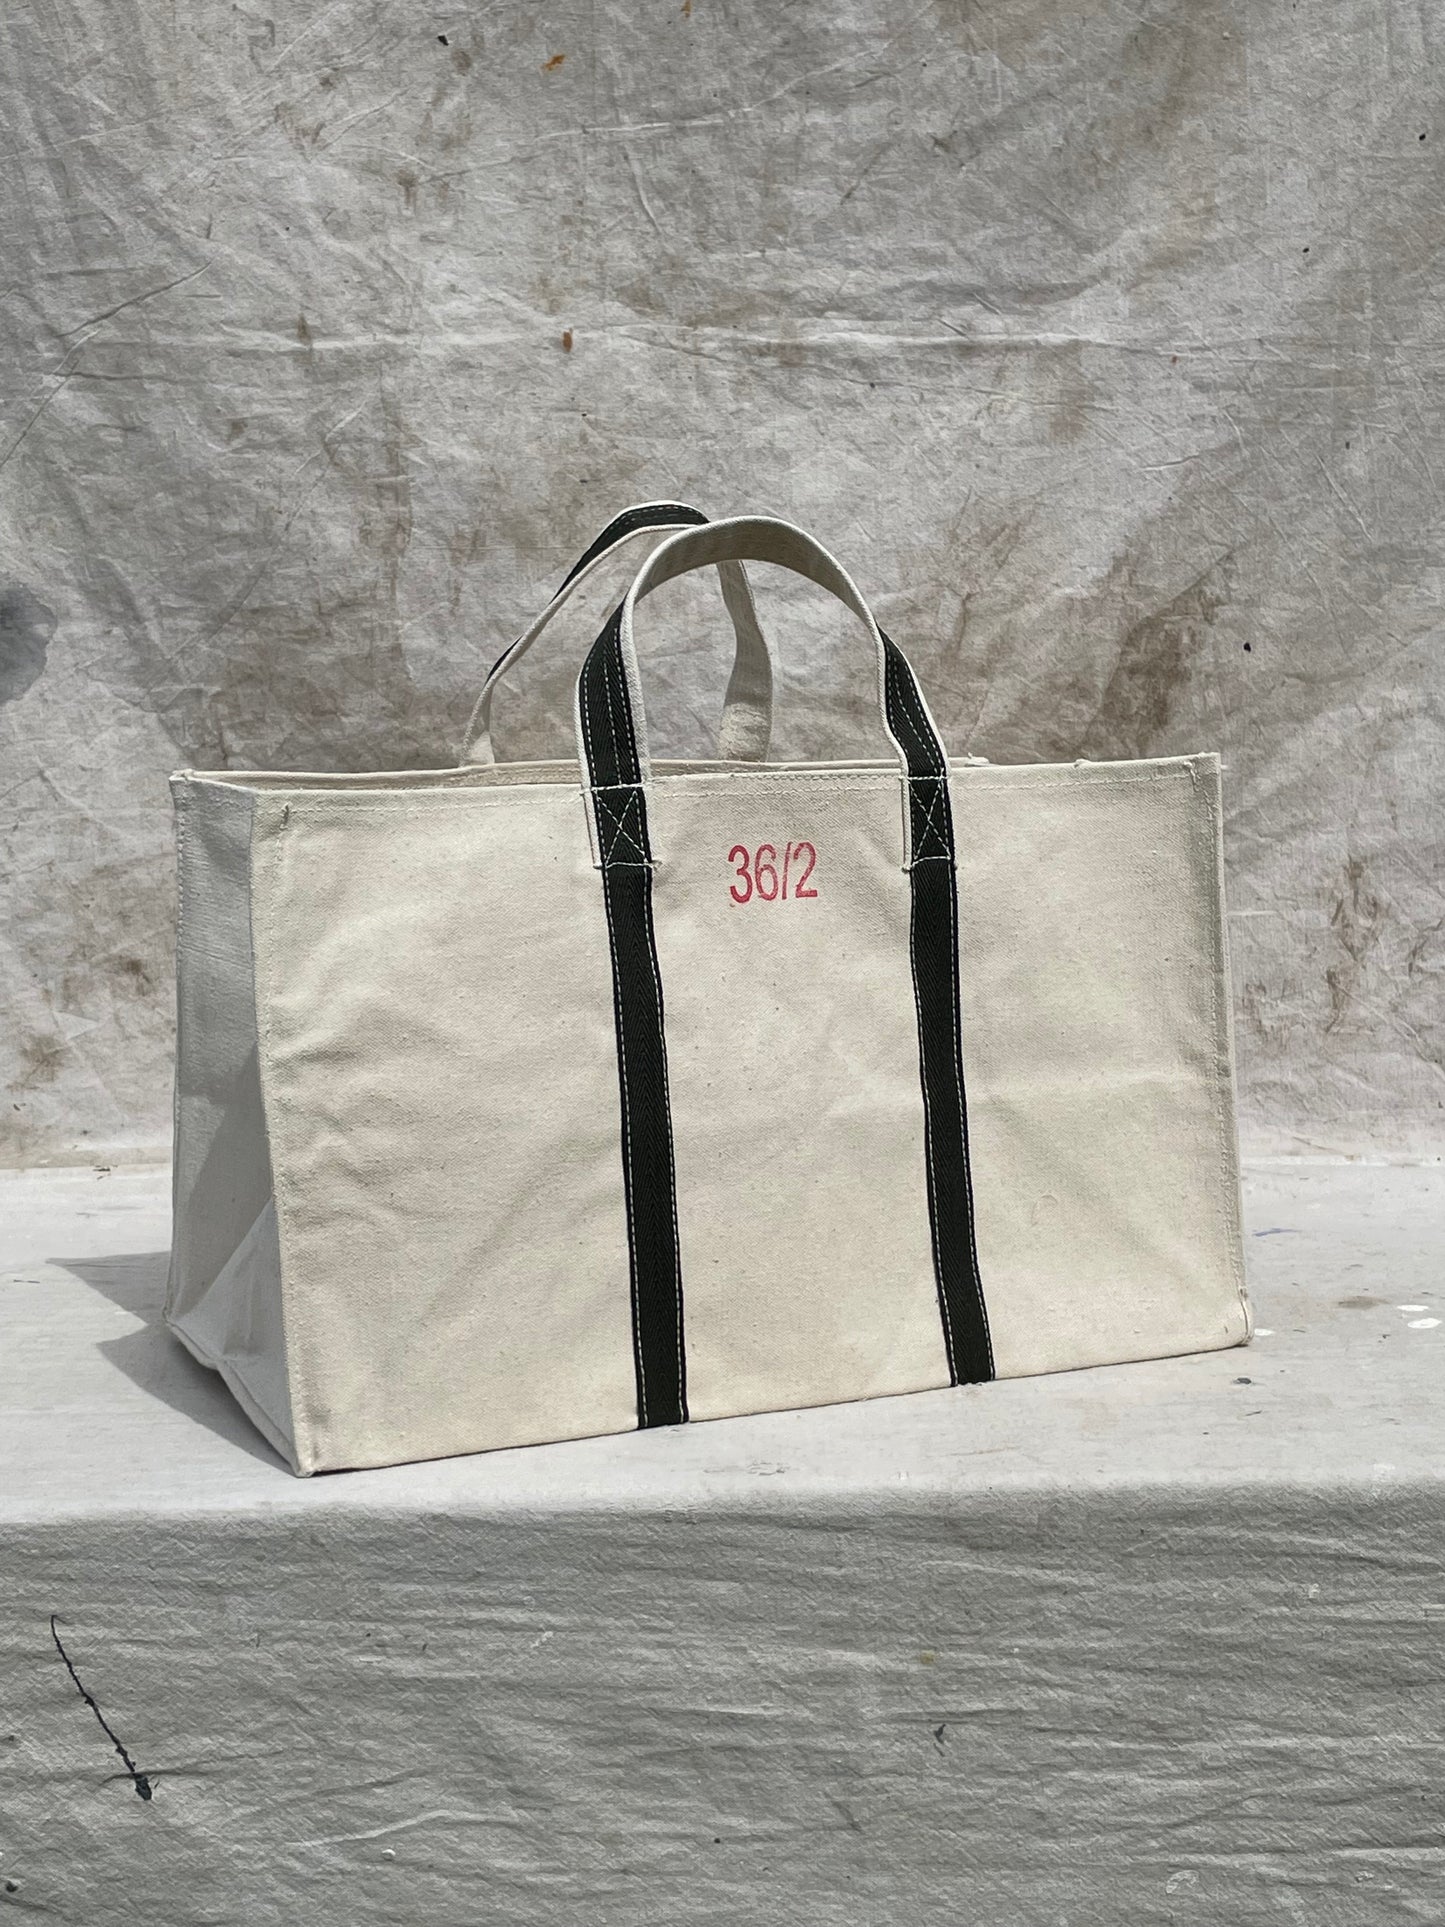 Heavy Duty Natural Canvas Tote Bag Size 36/2